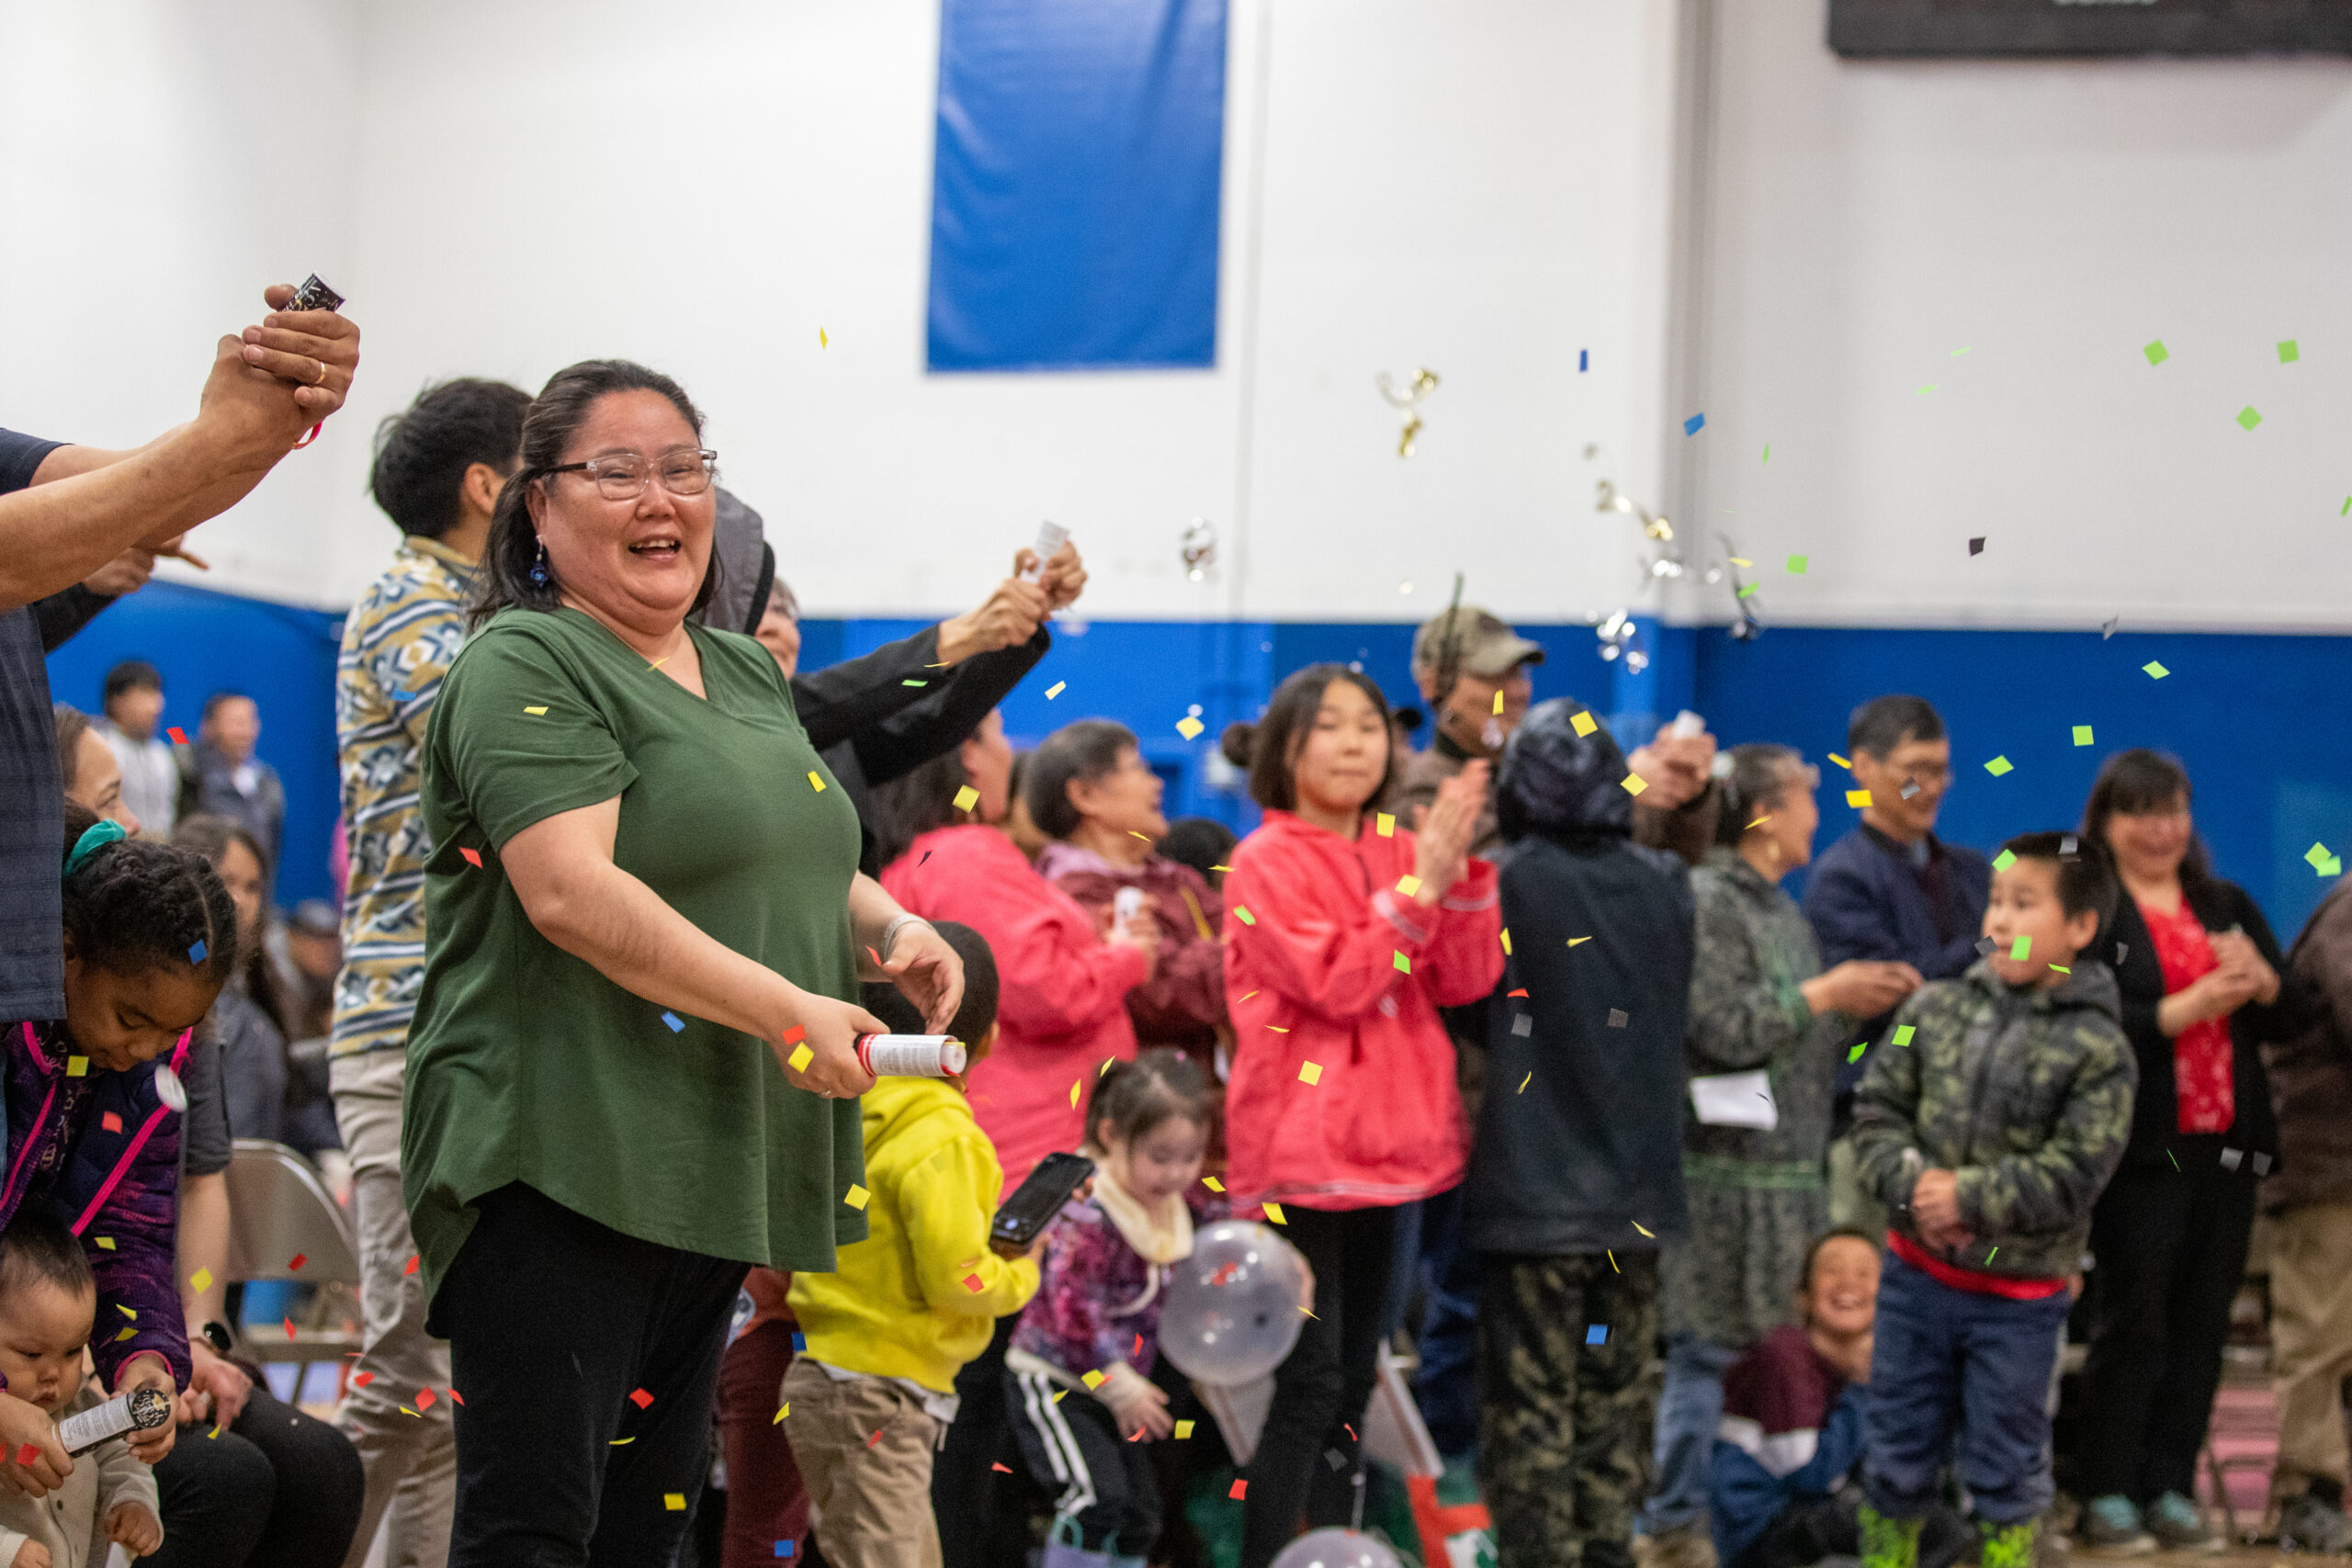 A crowd of people pop confetti canisters in a school gymnasium.